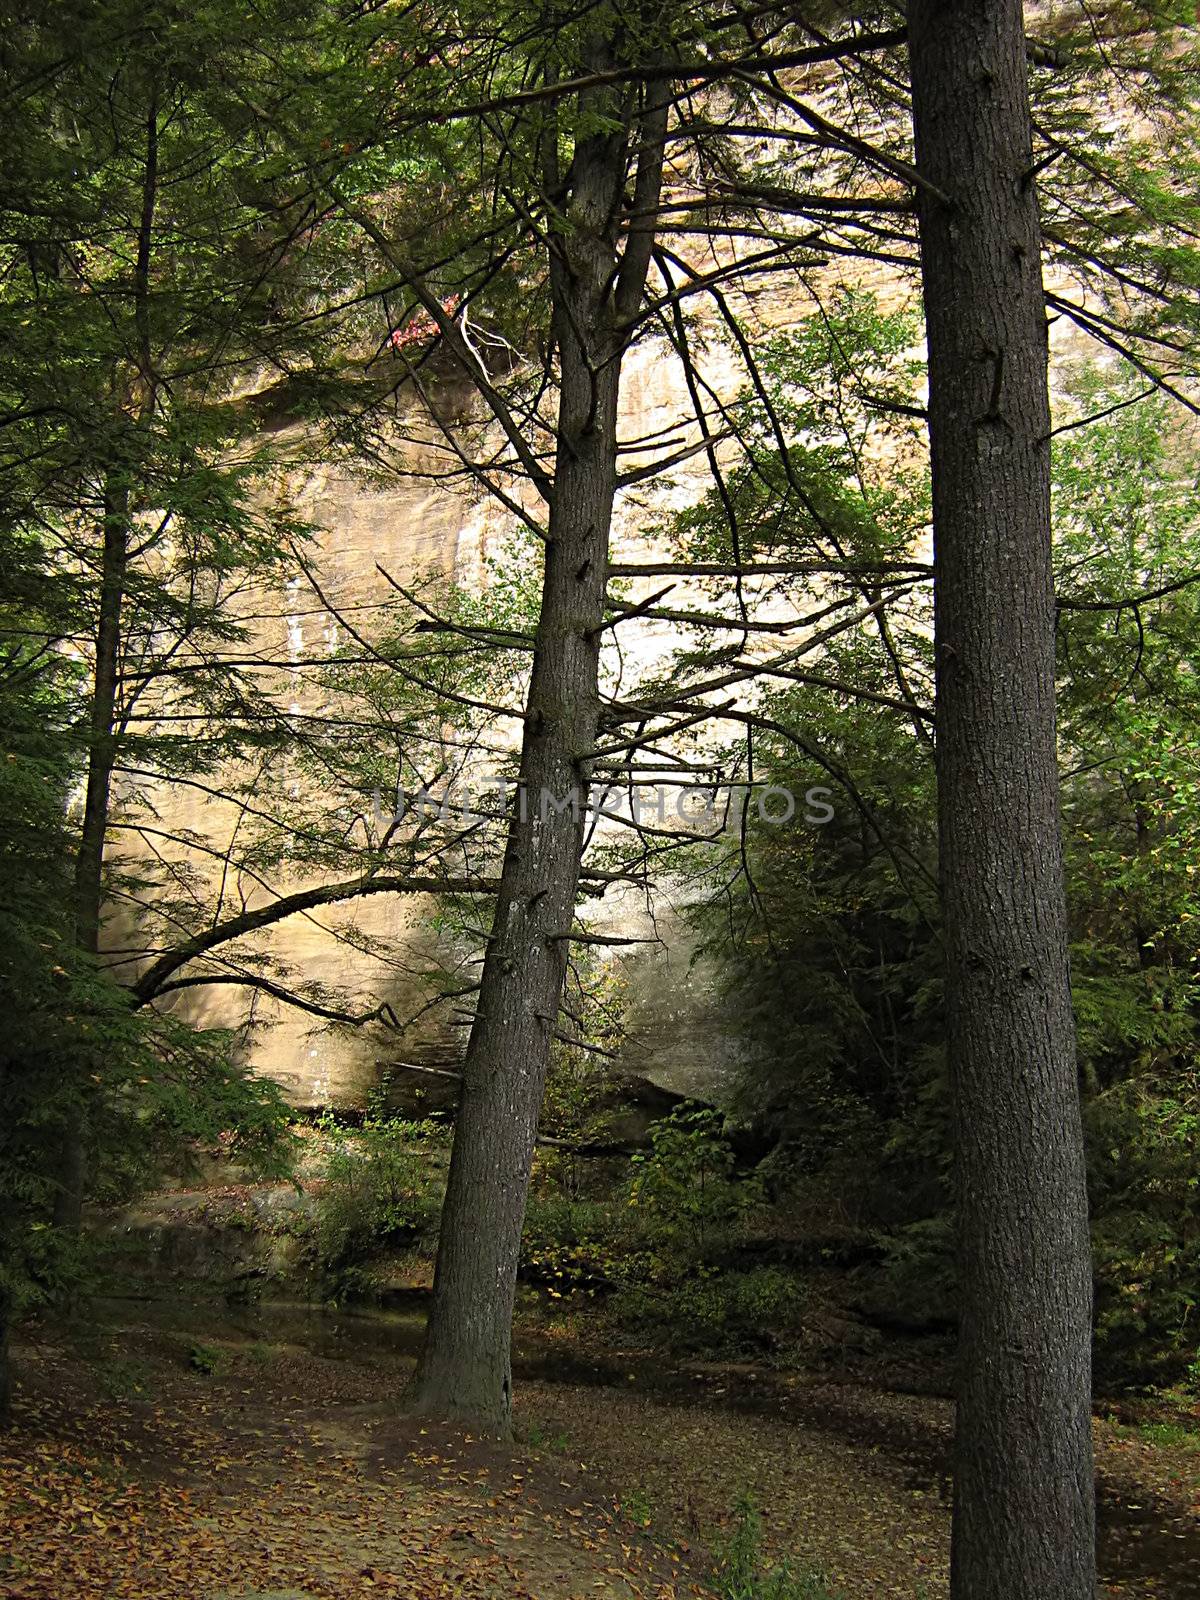 A photograph of Hocking Hills State Park located in the state of Ohio in the United States.